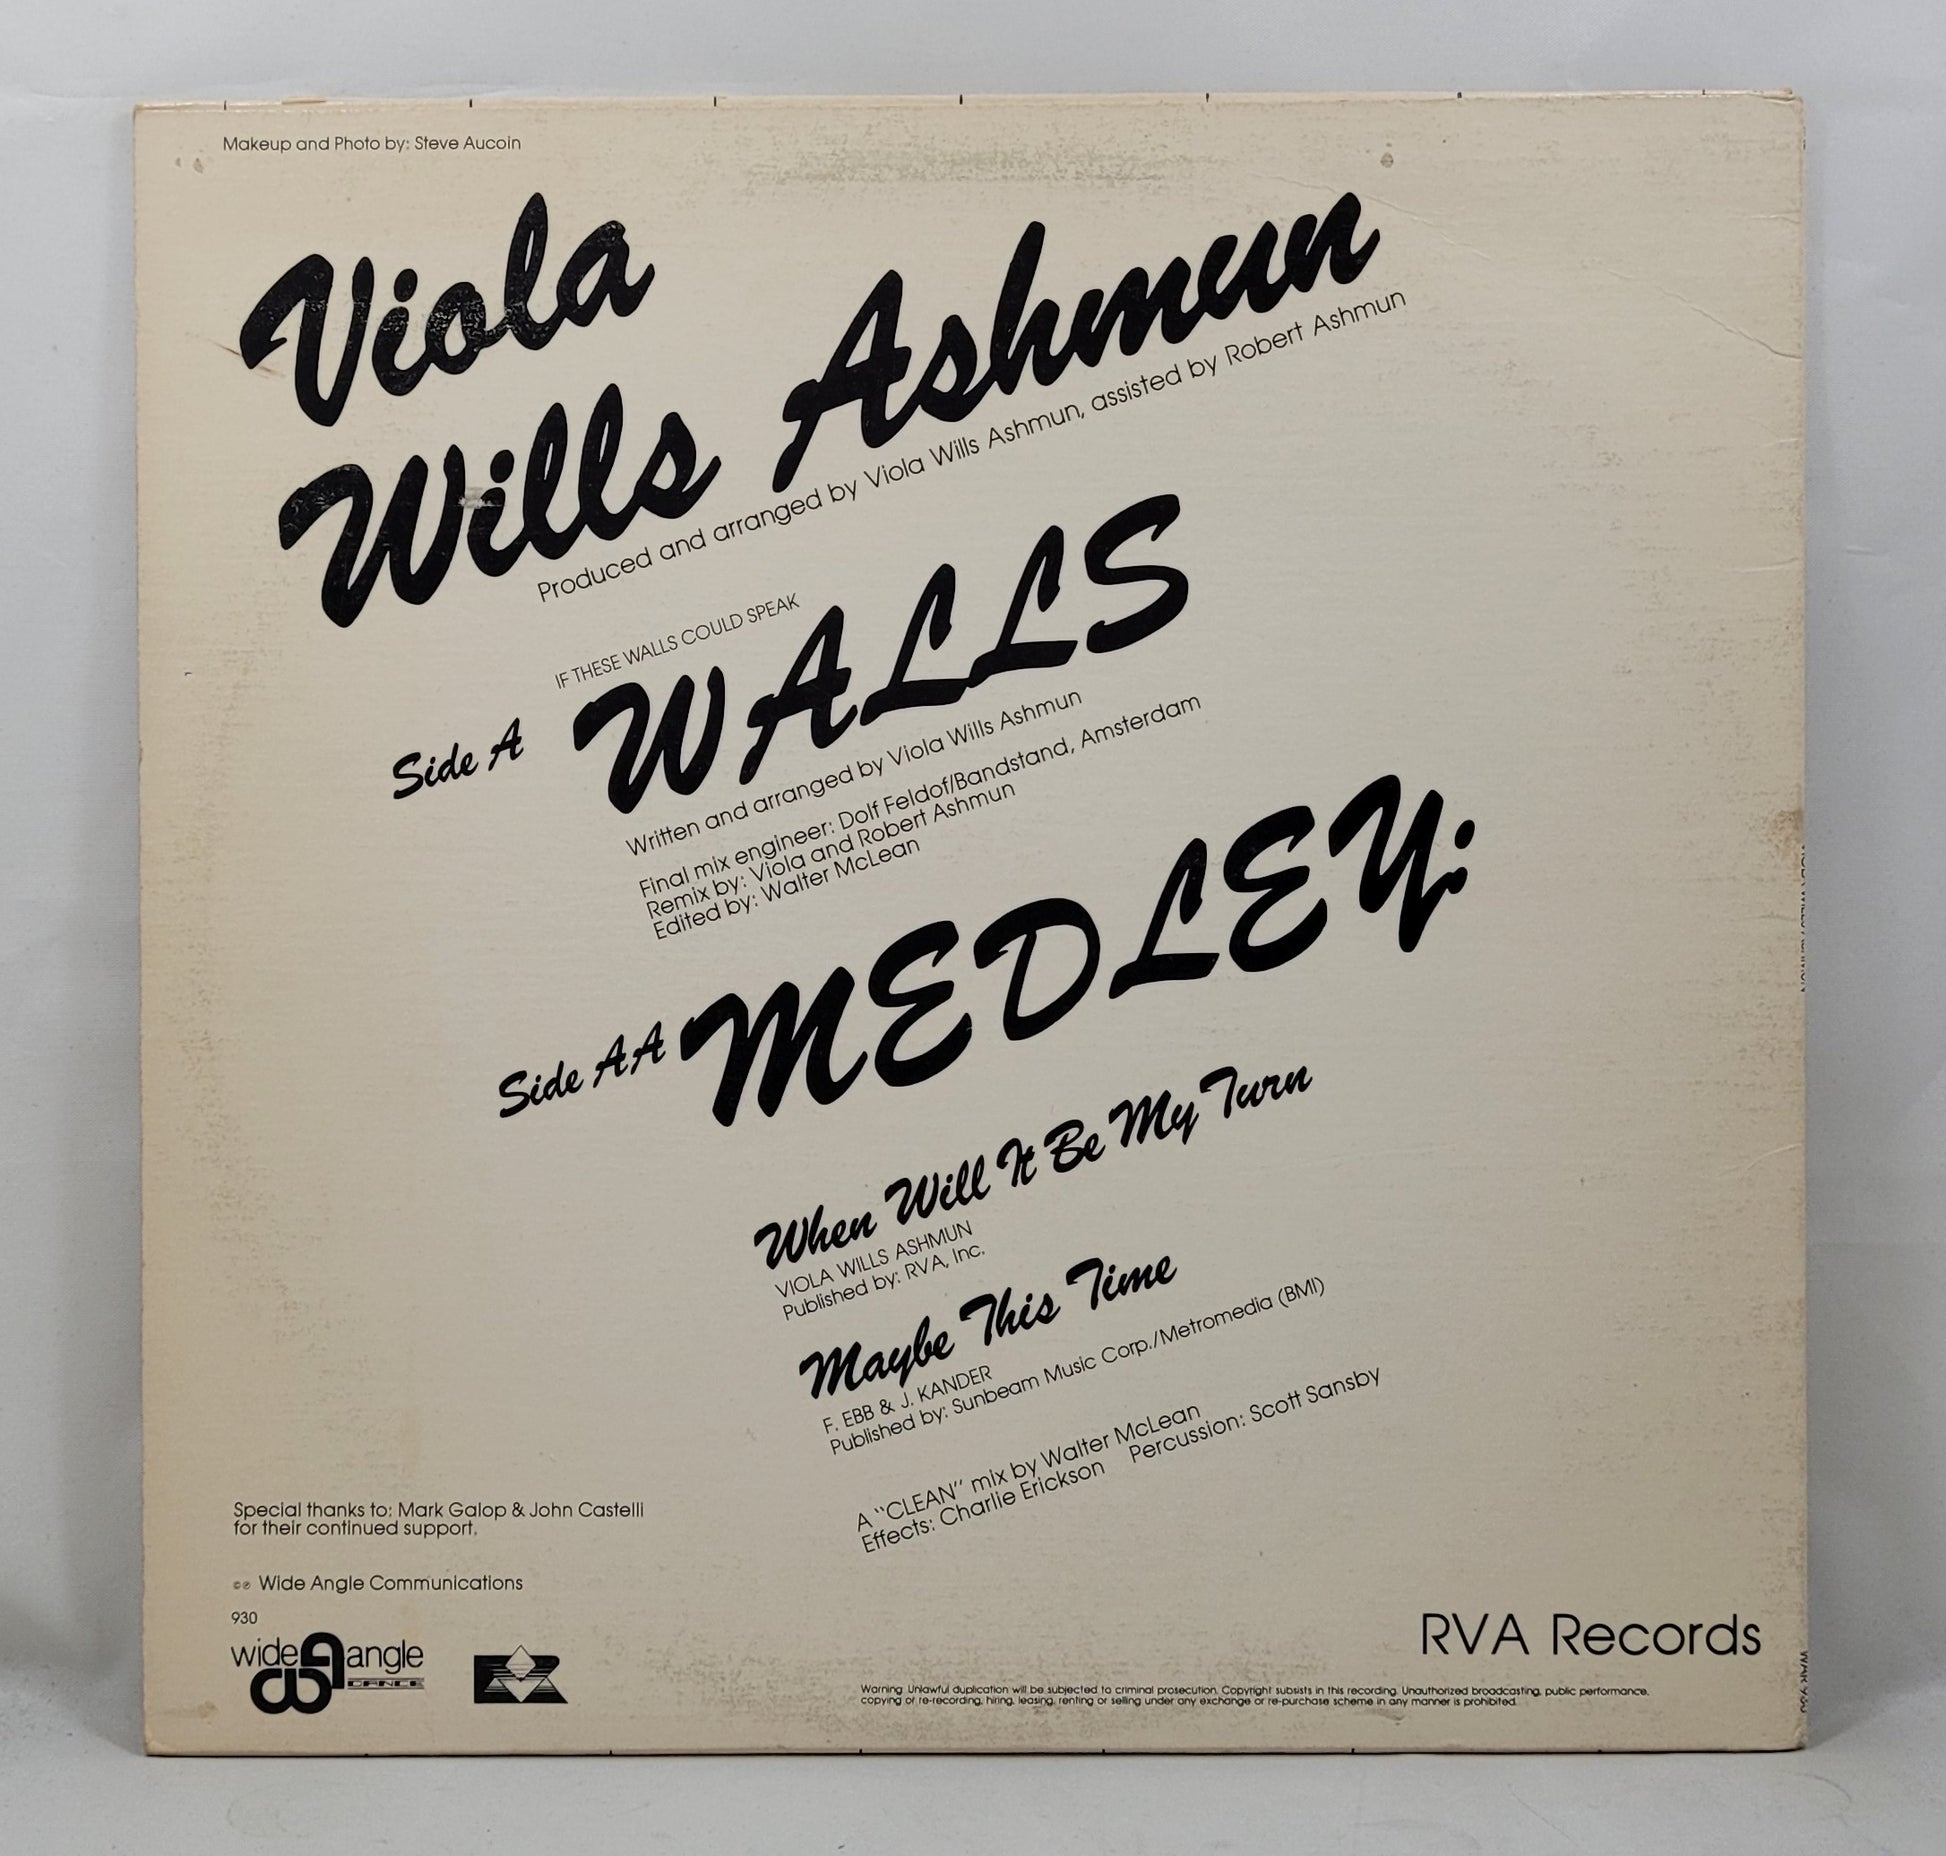 Viola Wills Ashmun - If These Walls Could Speak [1984 Used Vinyl Record 12" Single]